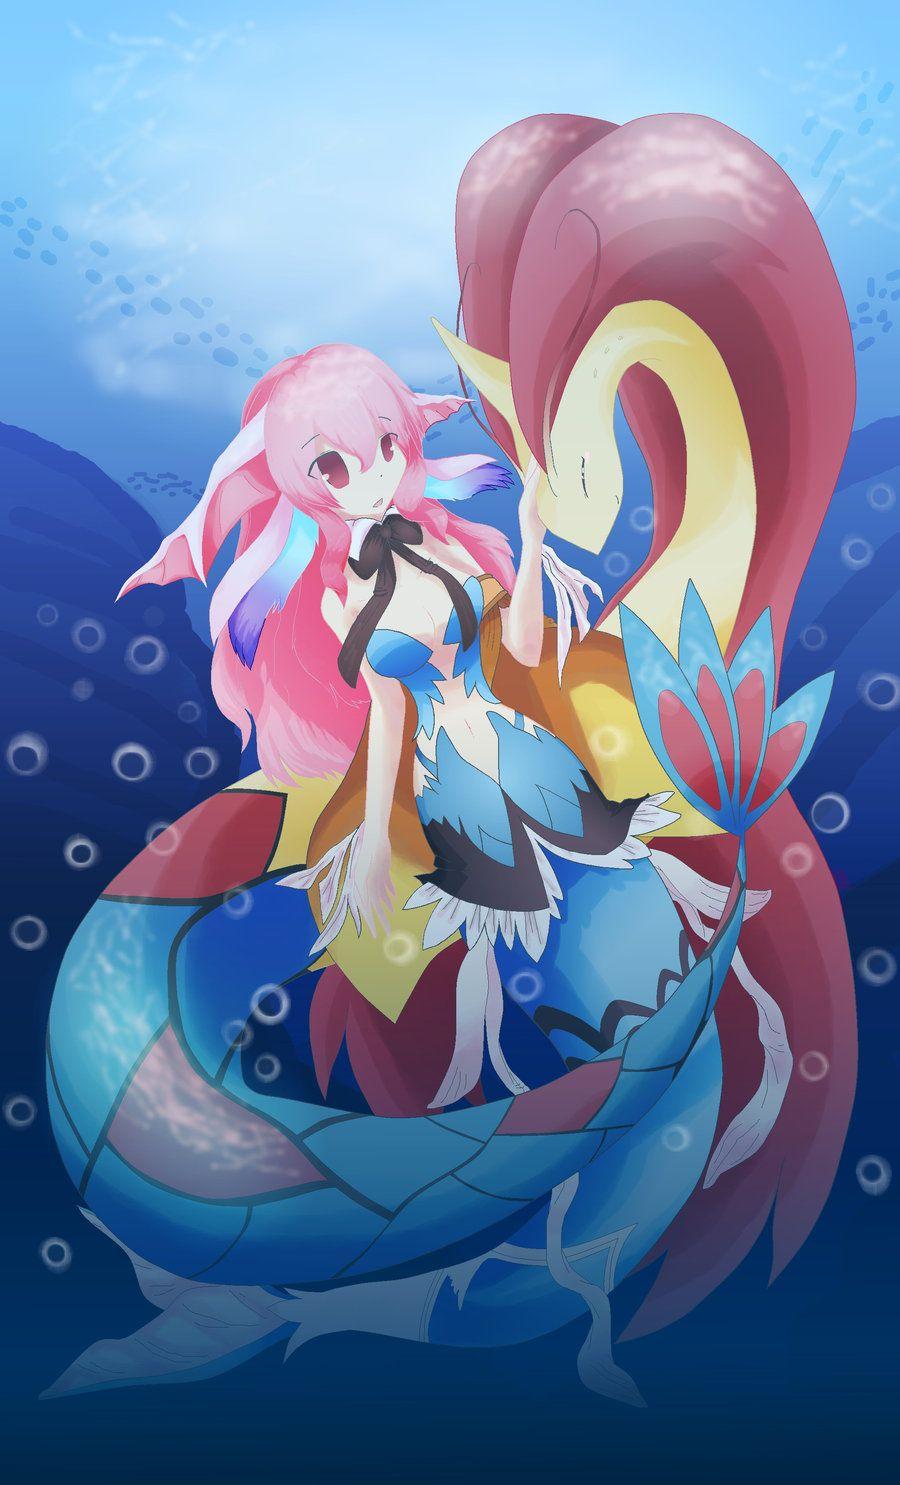 Pia from RF3 and Milotic from Pokemon totally look alike. Mother